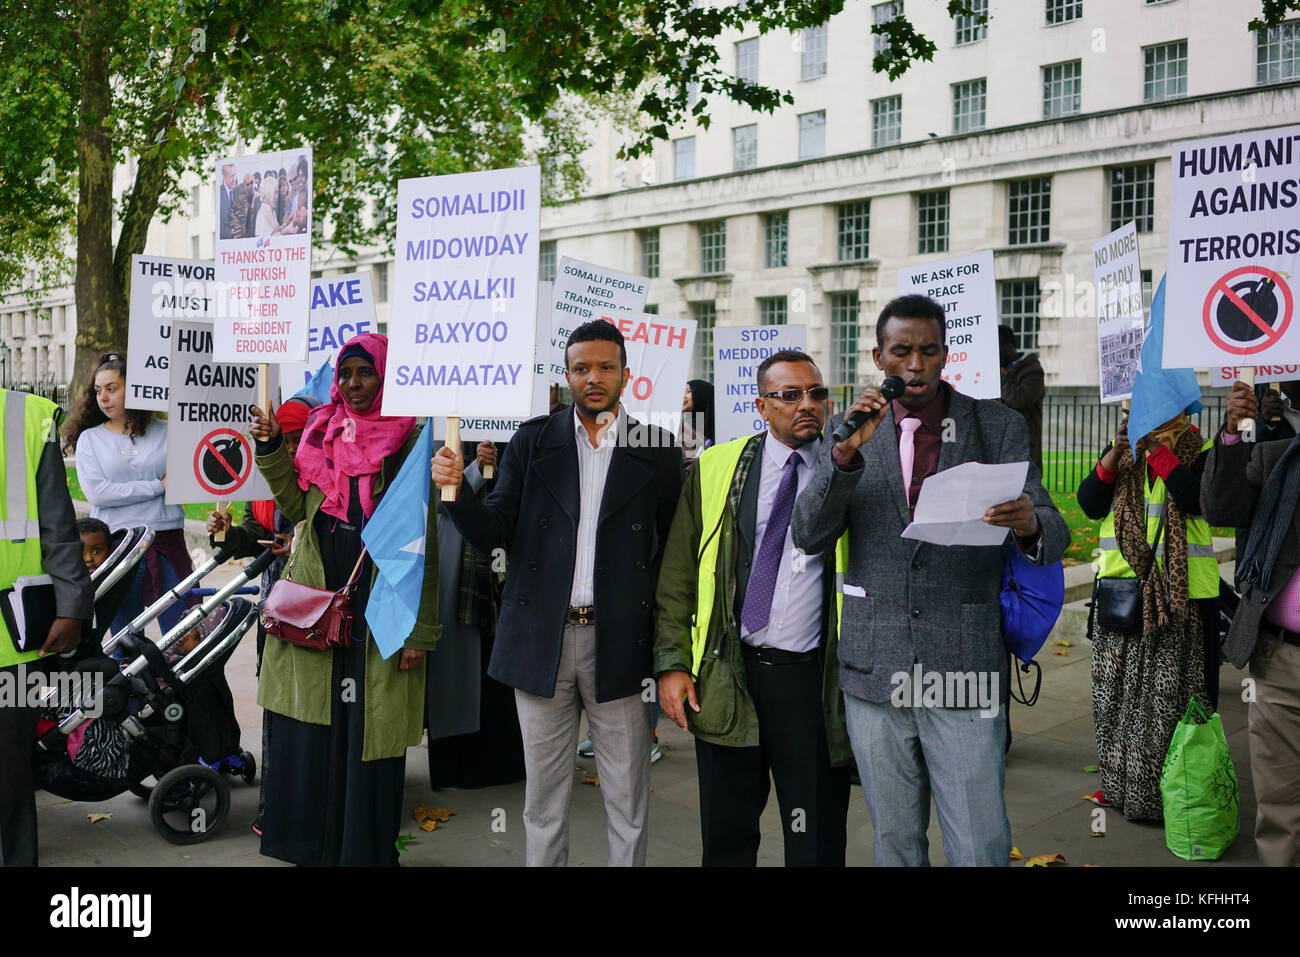 London, England, UK. 29th October 2017. Somalis Islam against terrorism protest against the bombing on 14th October in Mogadishu outside downing Street. Credit: See Li/Alamy Live News Stock Photo